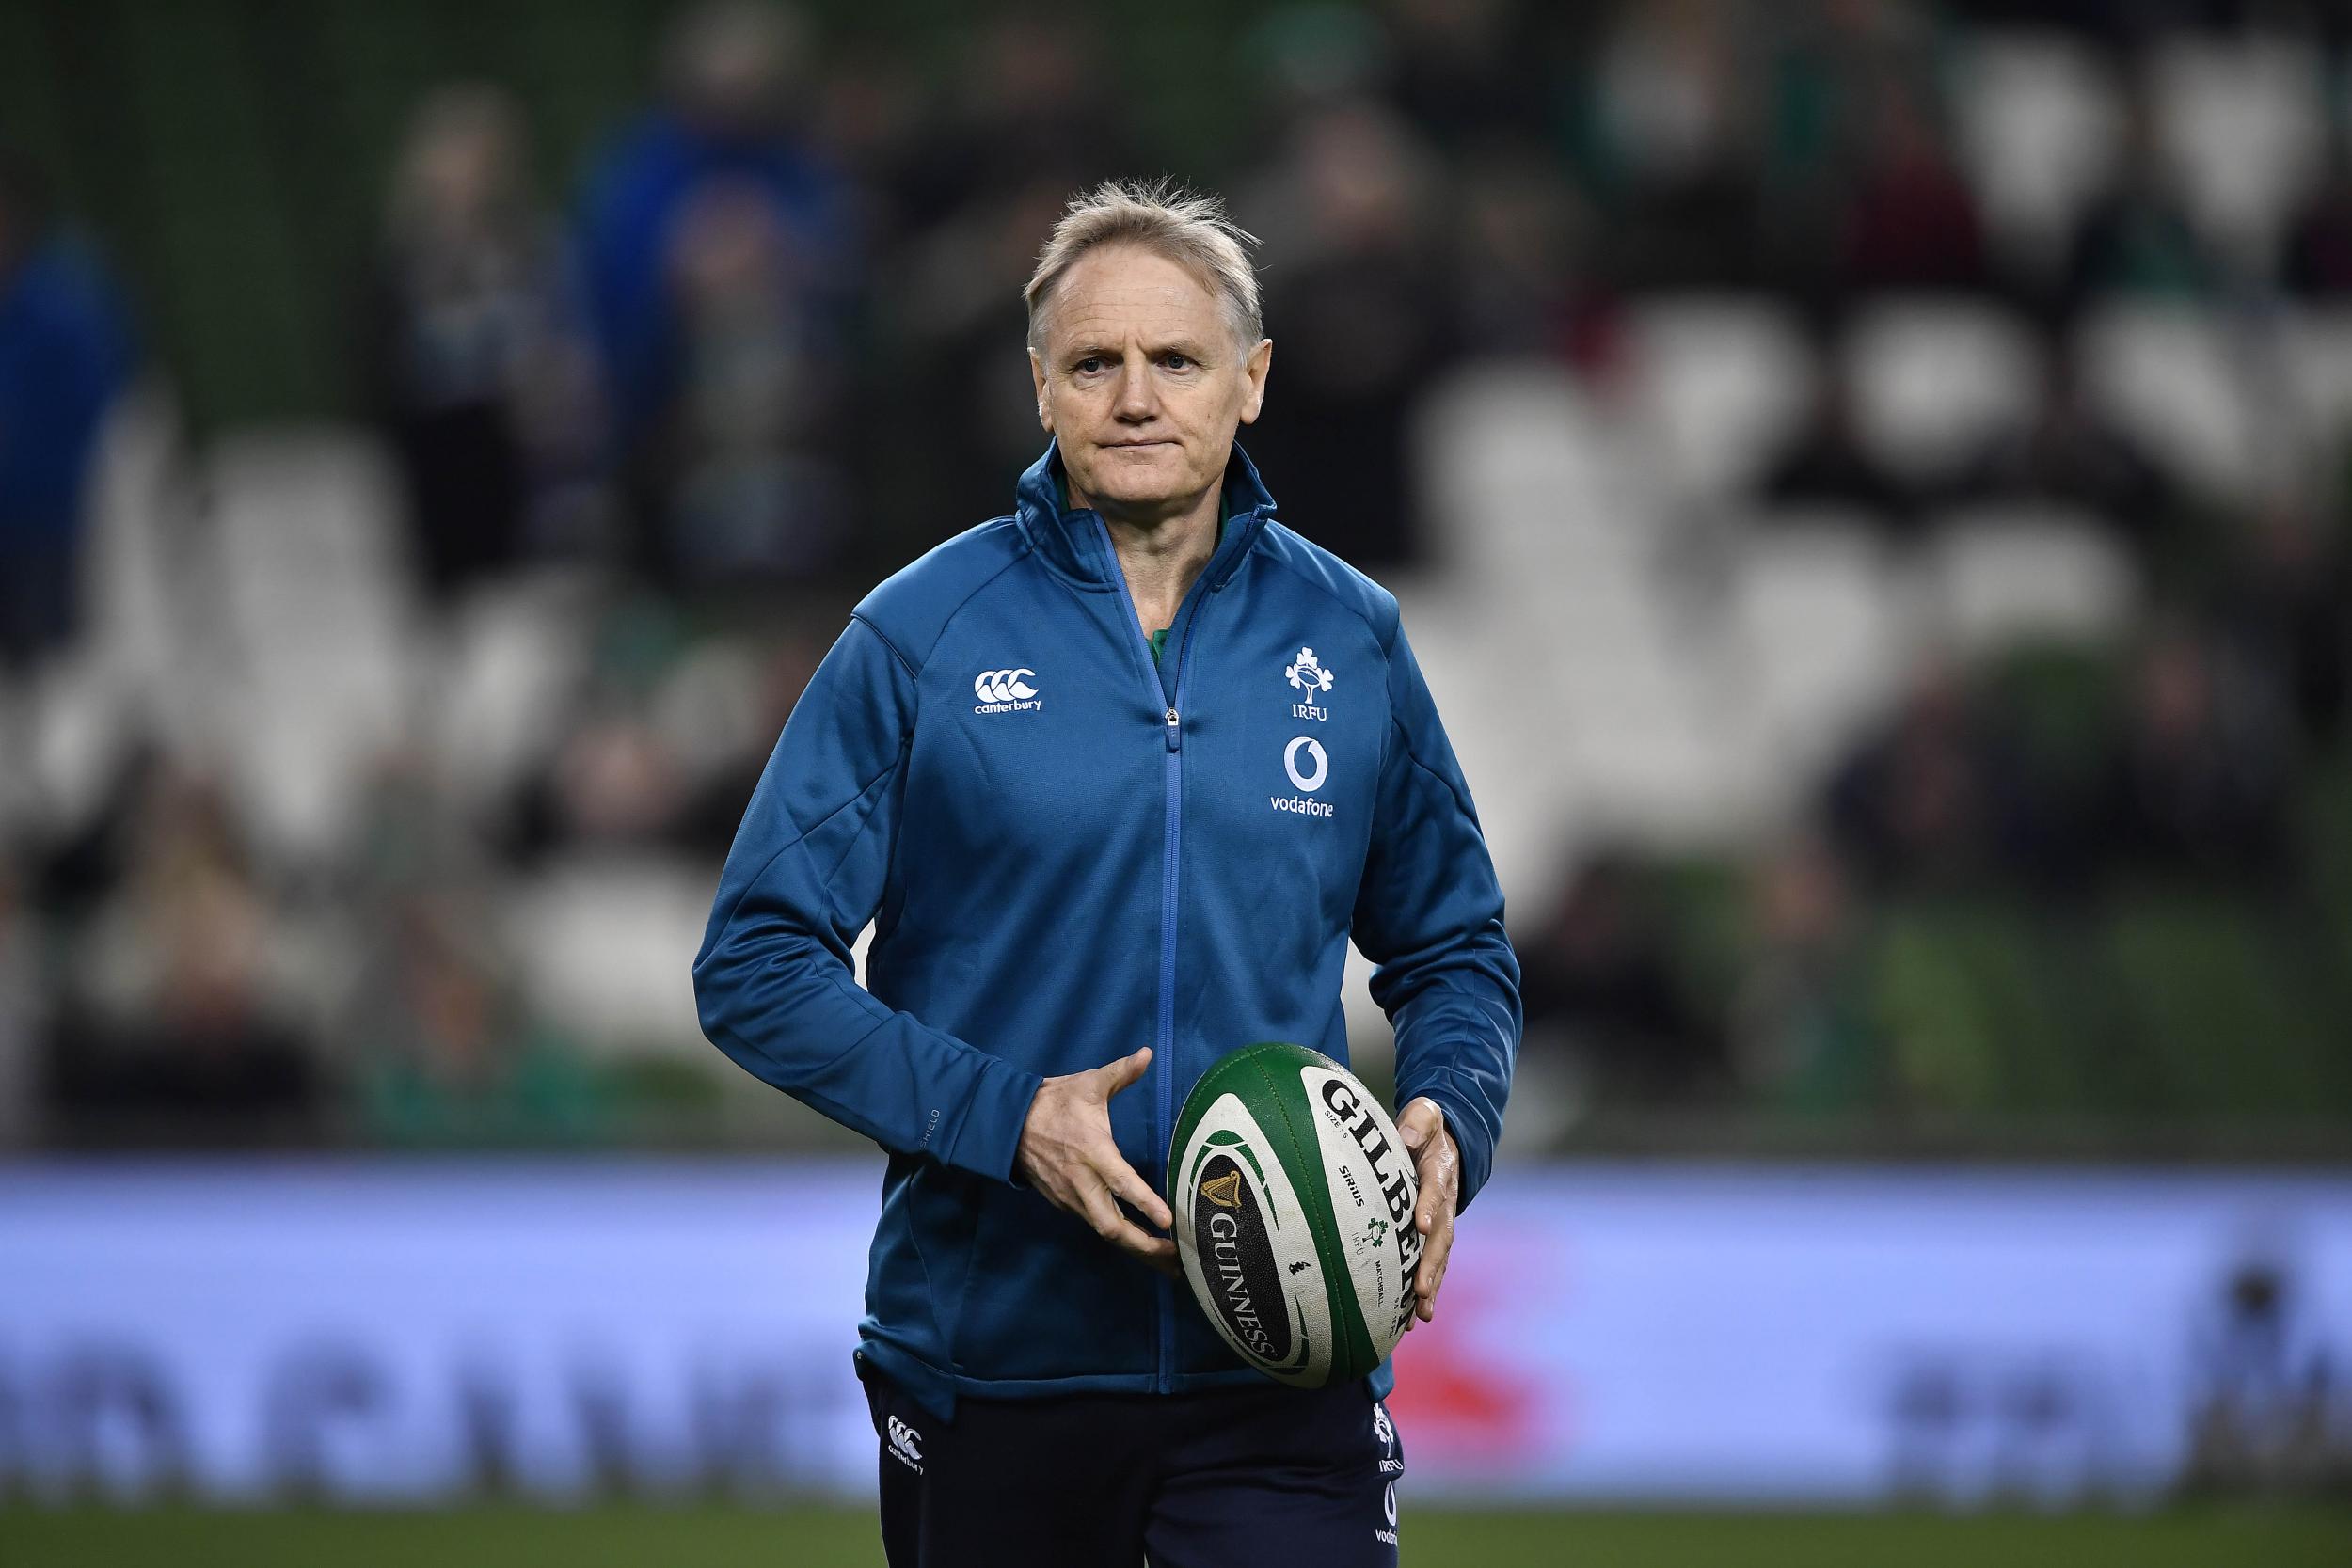 Joe Schmidt will leave Ireland at the end of the year